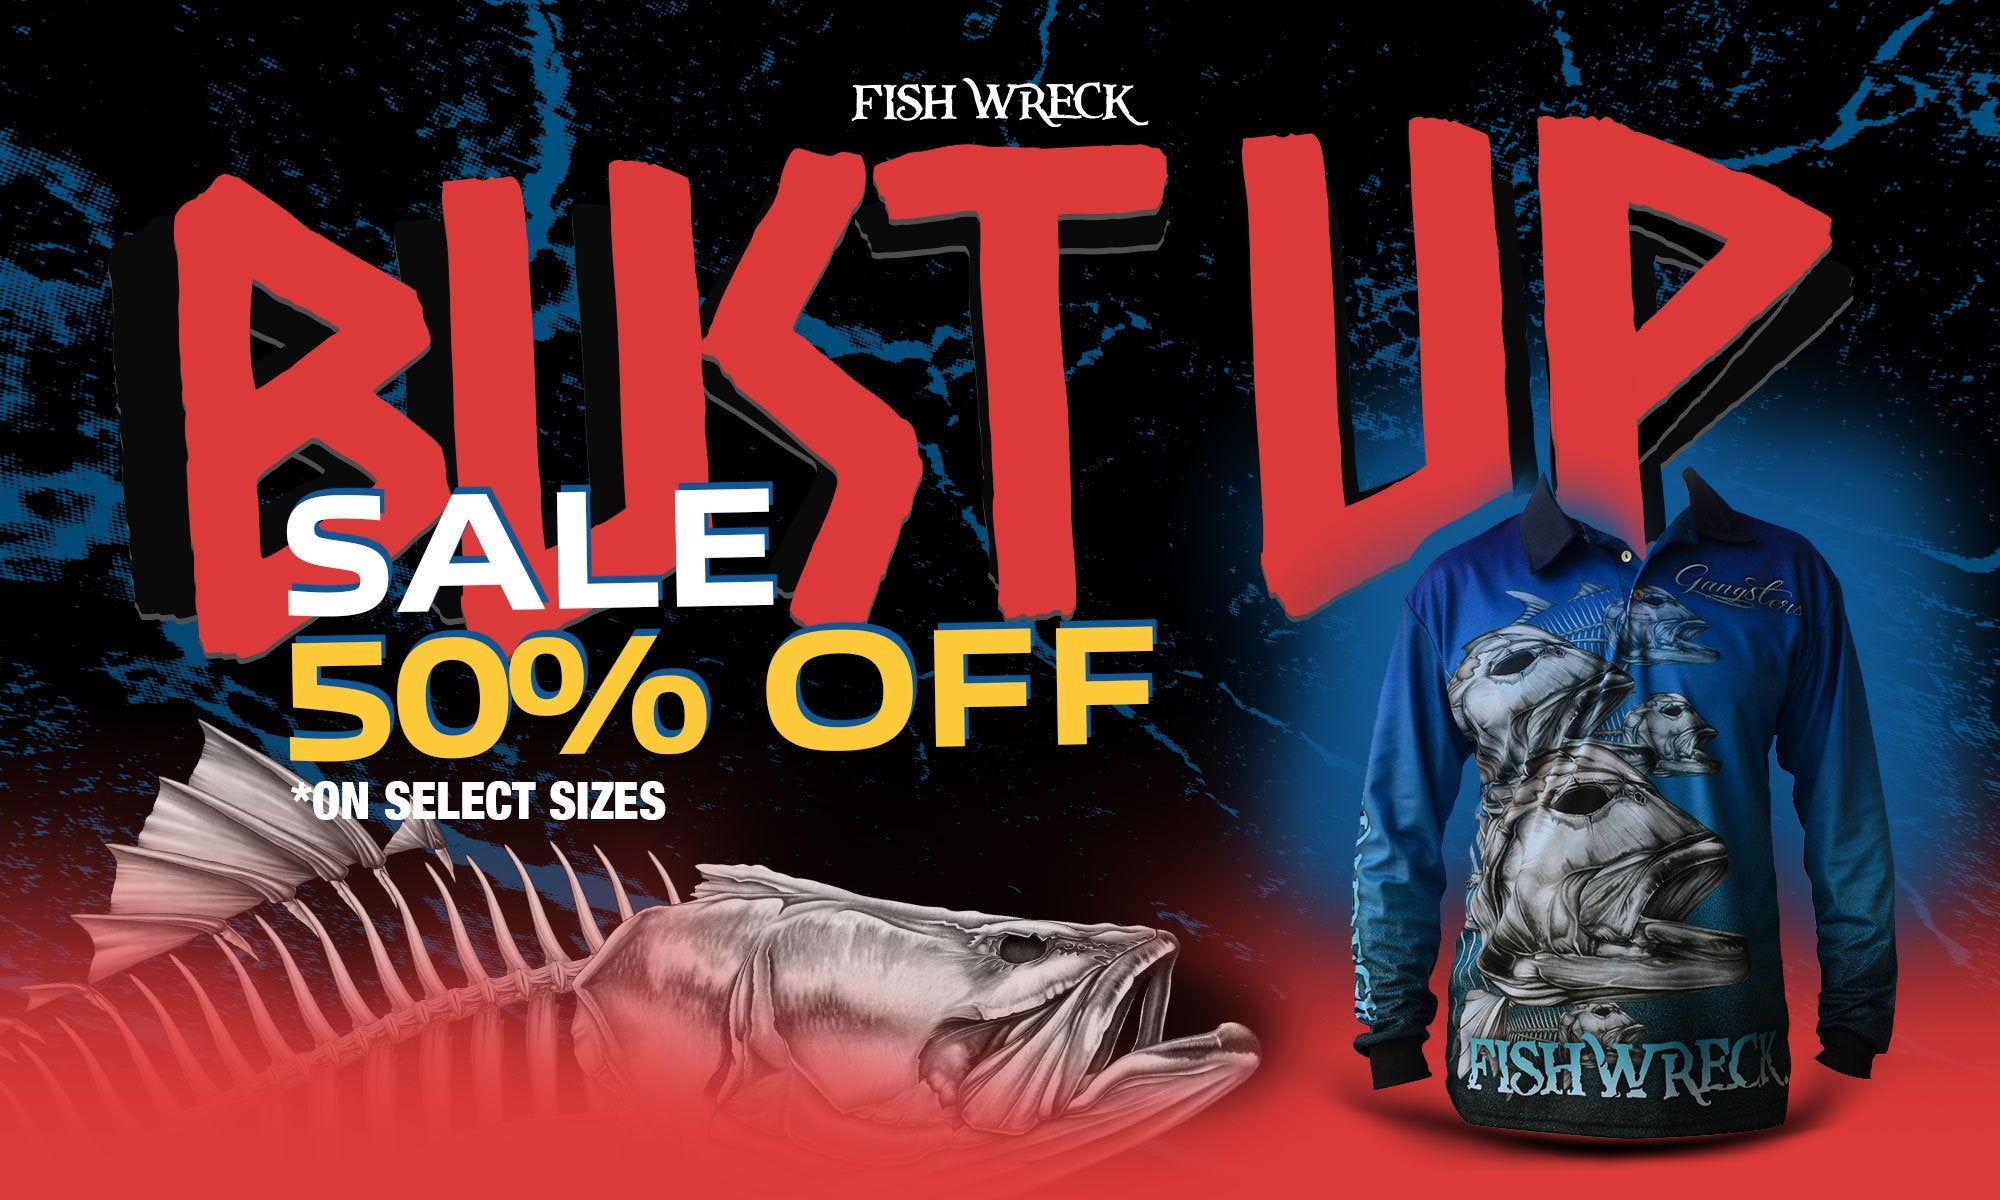 Bust-Up Friday Sale! Hottest deals. Premium Fishing Apparel by Fish Wreck